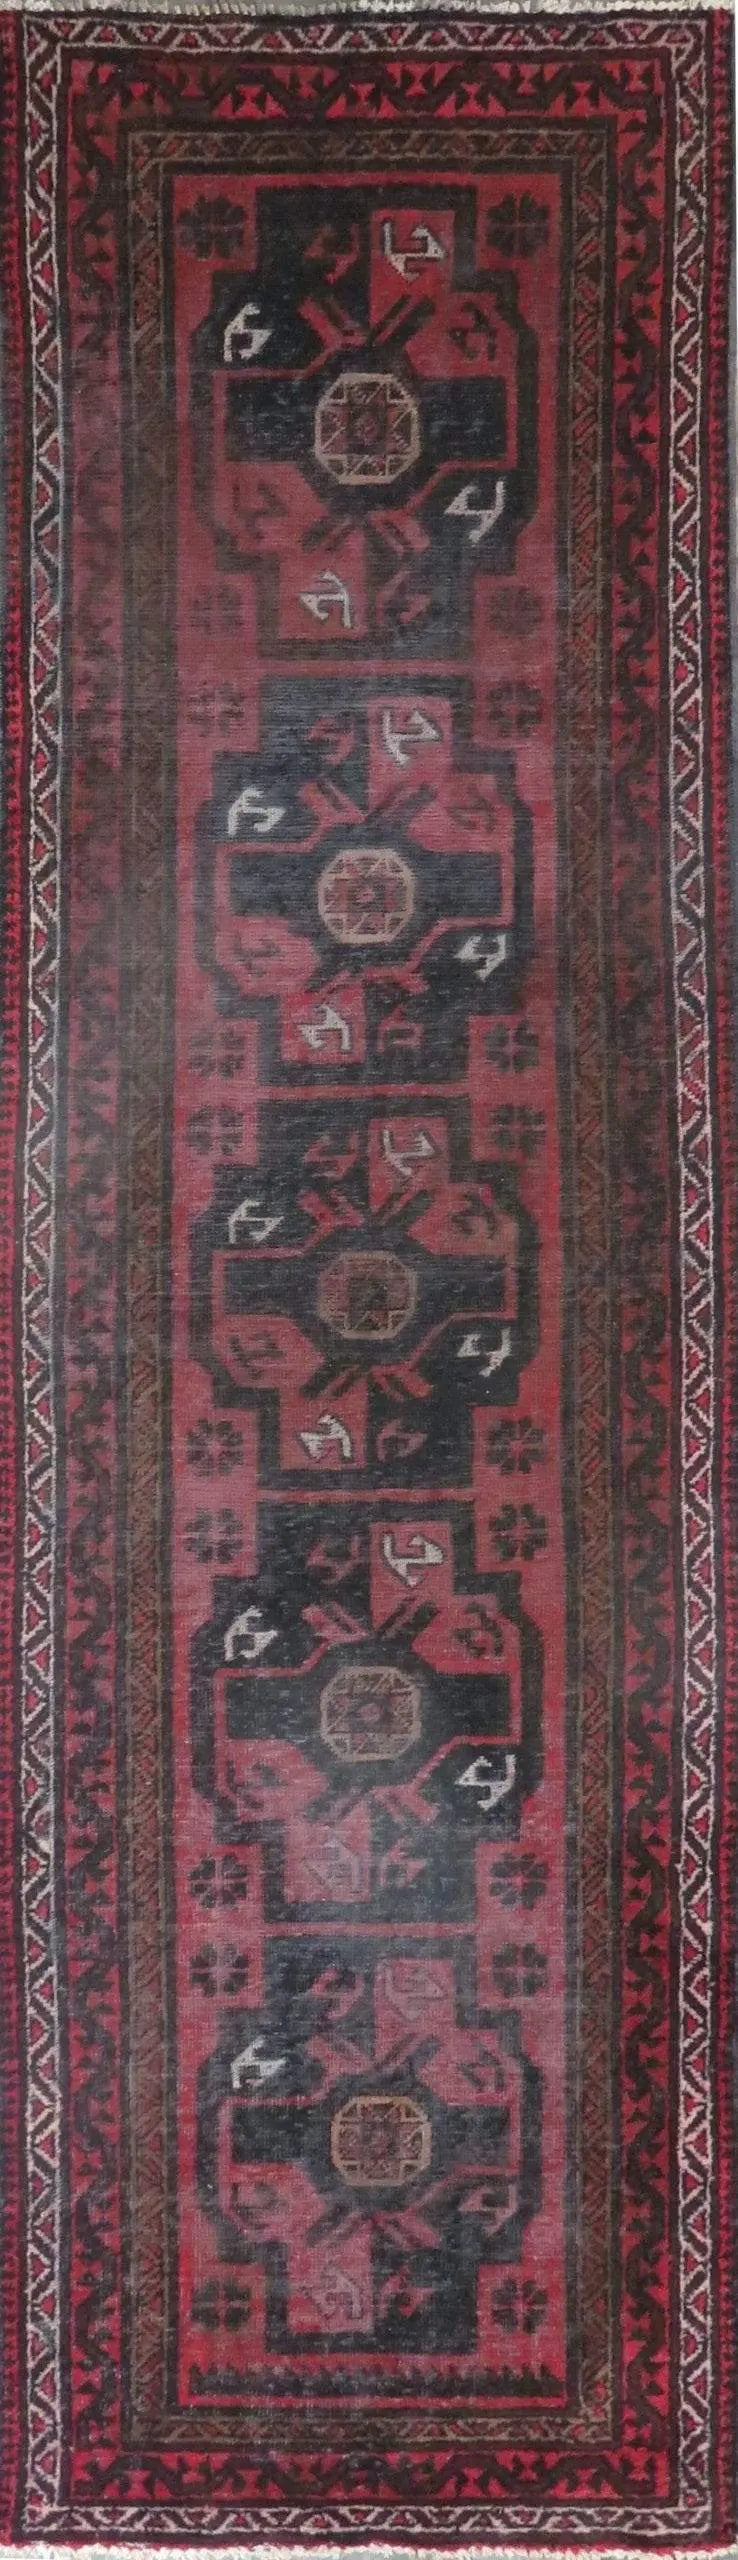 Hand-Knotted Persian Wool Rug _ Luxurious Vintage Design, 10'8' x 3'2", Artisan Crafted